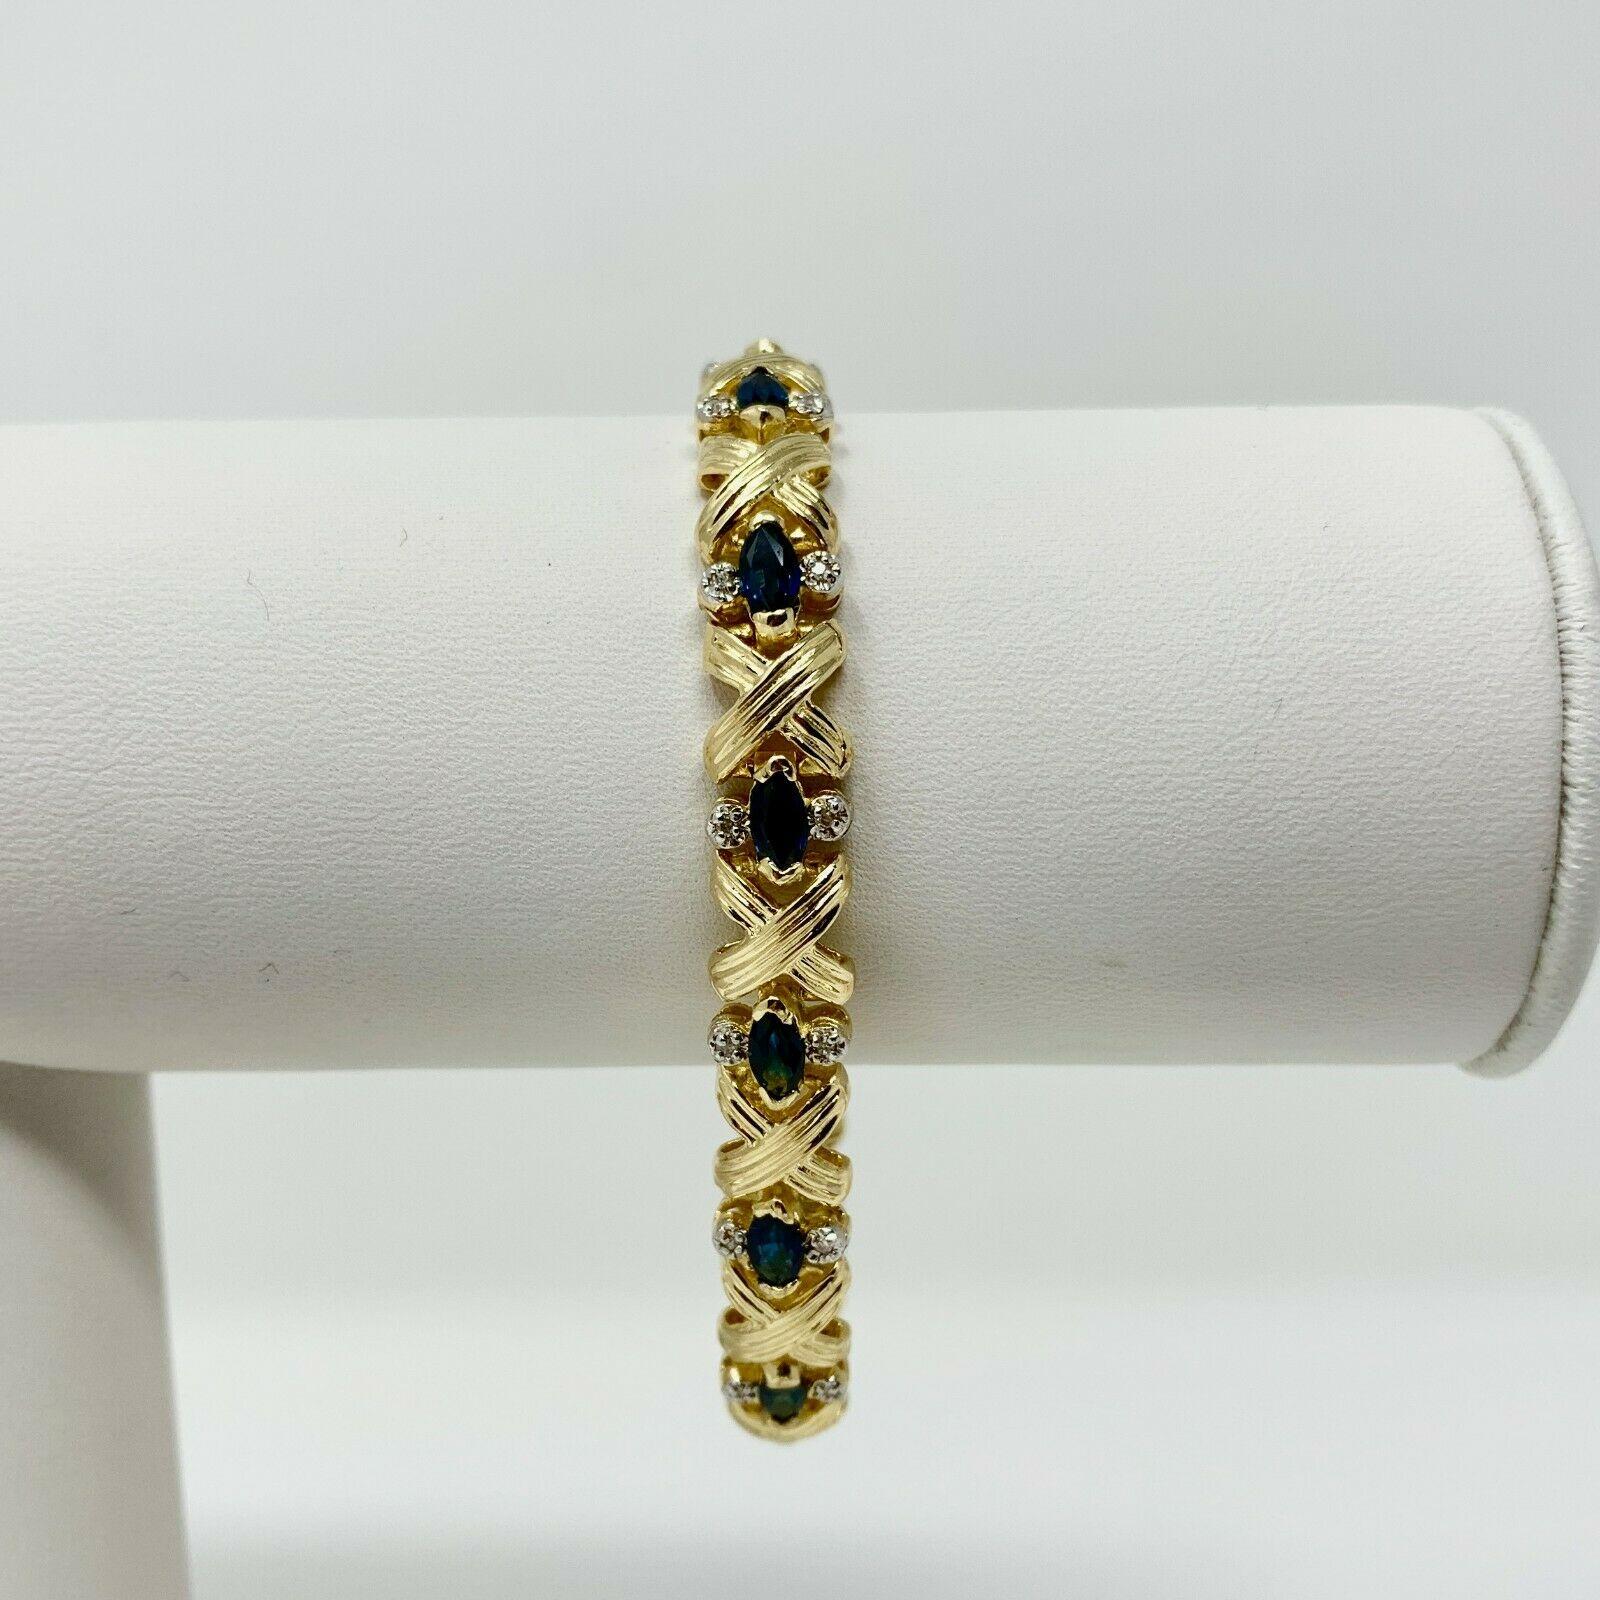 14k Yellow Gold Blue Sapphire and Diamond X Cross Link Bracelet 6.75 Inches

Condition:  Excellent (Professionally Cleaned and Polished)
Metal:  14k Gold (Marked, and Professionally Tested)
Weight:  17.7g
Length:  6.75 Inches Wearable Length
Width: 